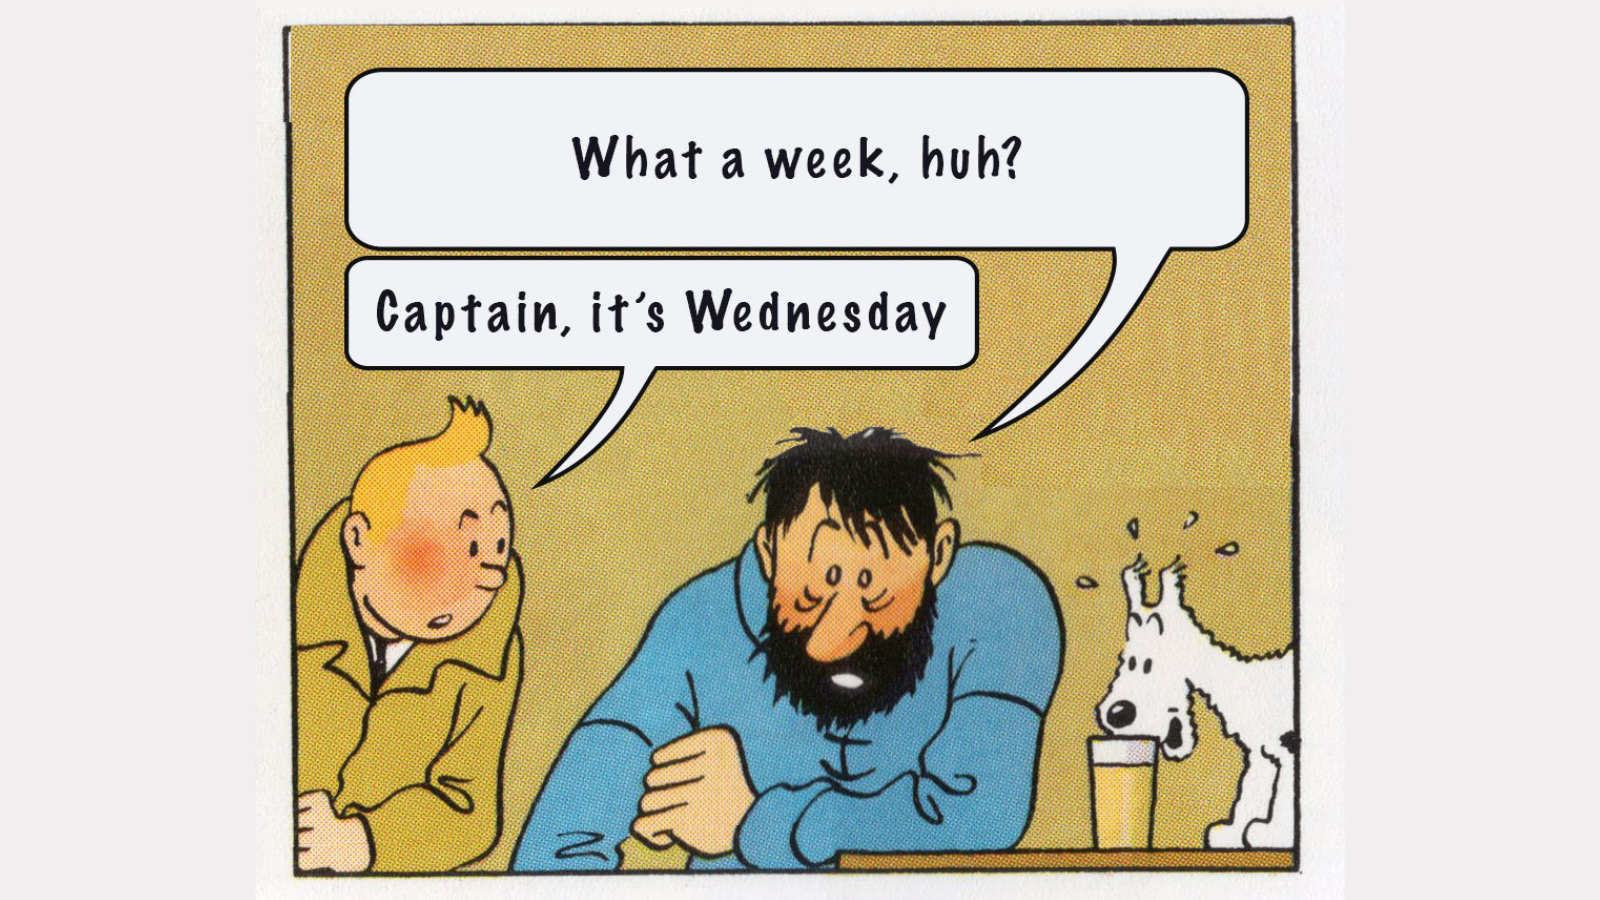 The Tintin "What a week, huh?" "Captain, it's Wednesday" meme image.